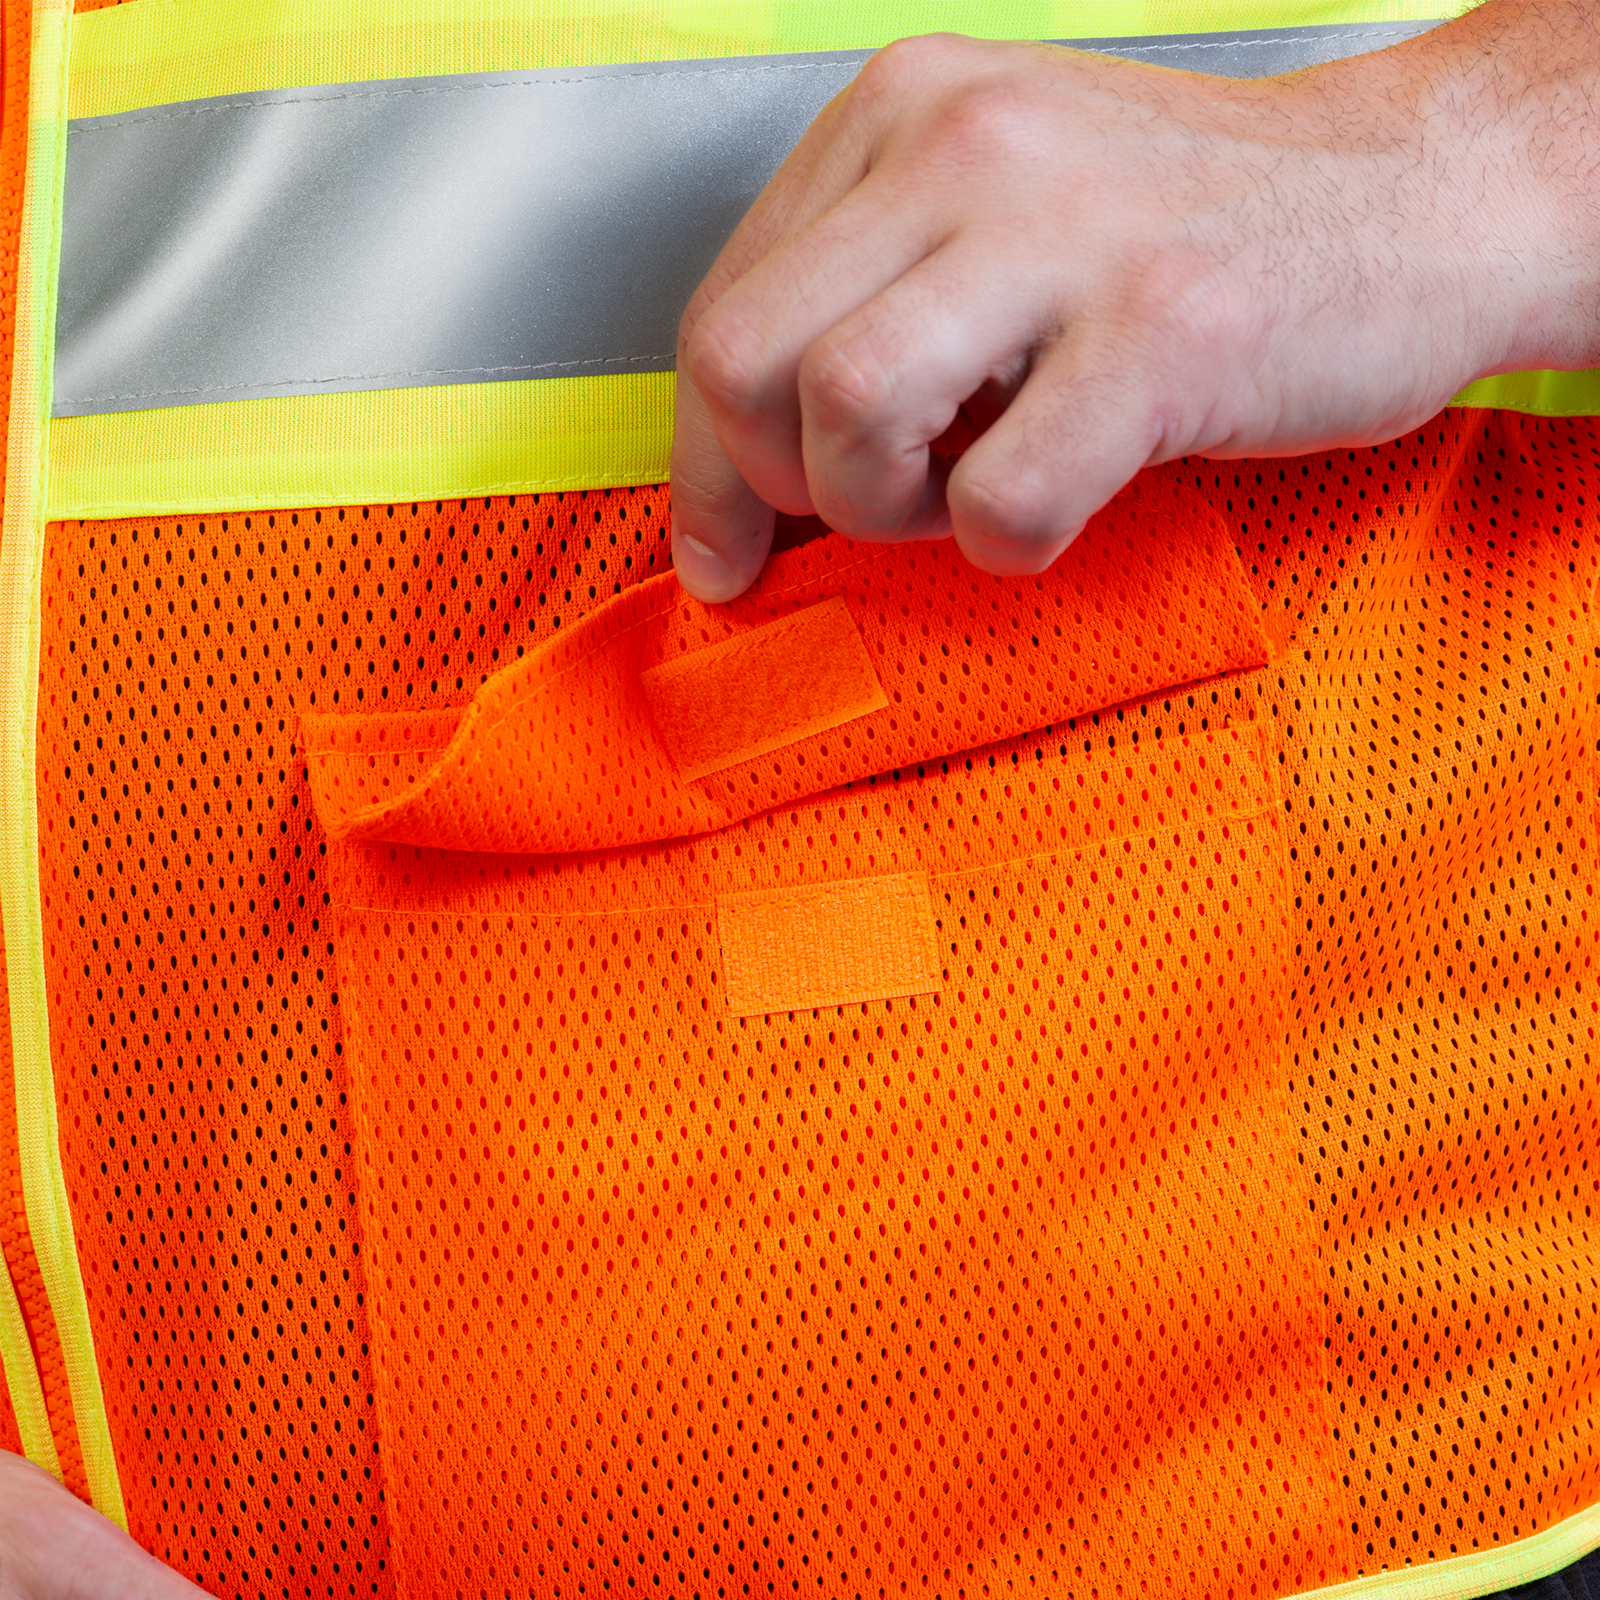 Close up of the pocket on the reflective safety vest with zipper closure